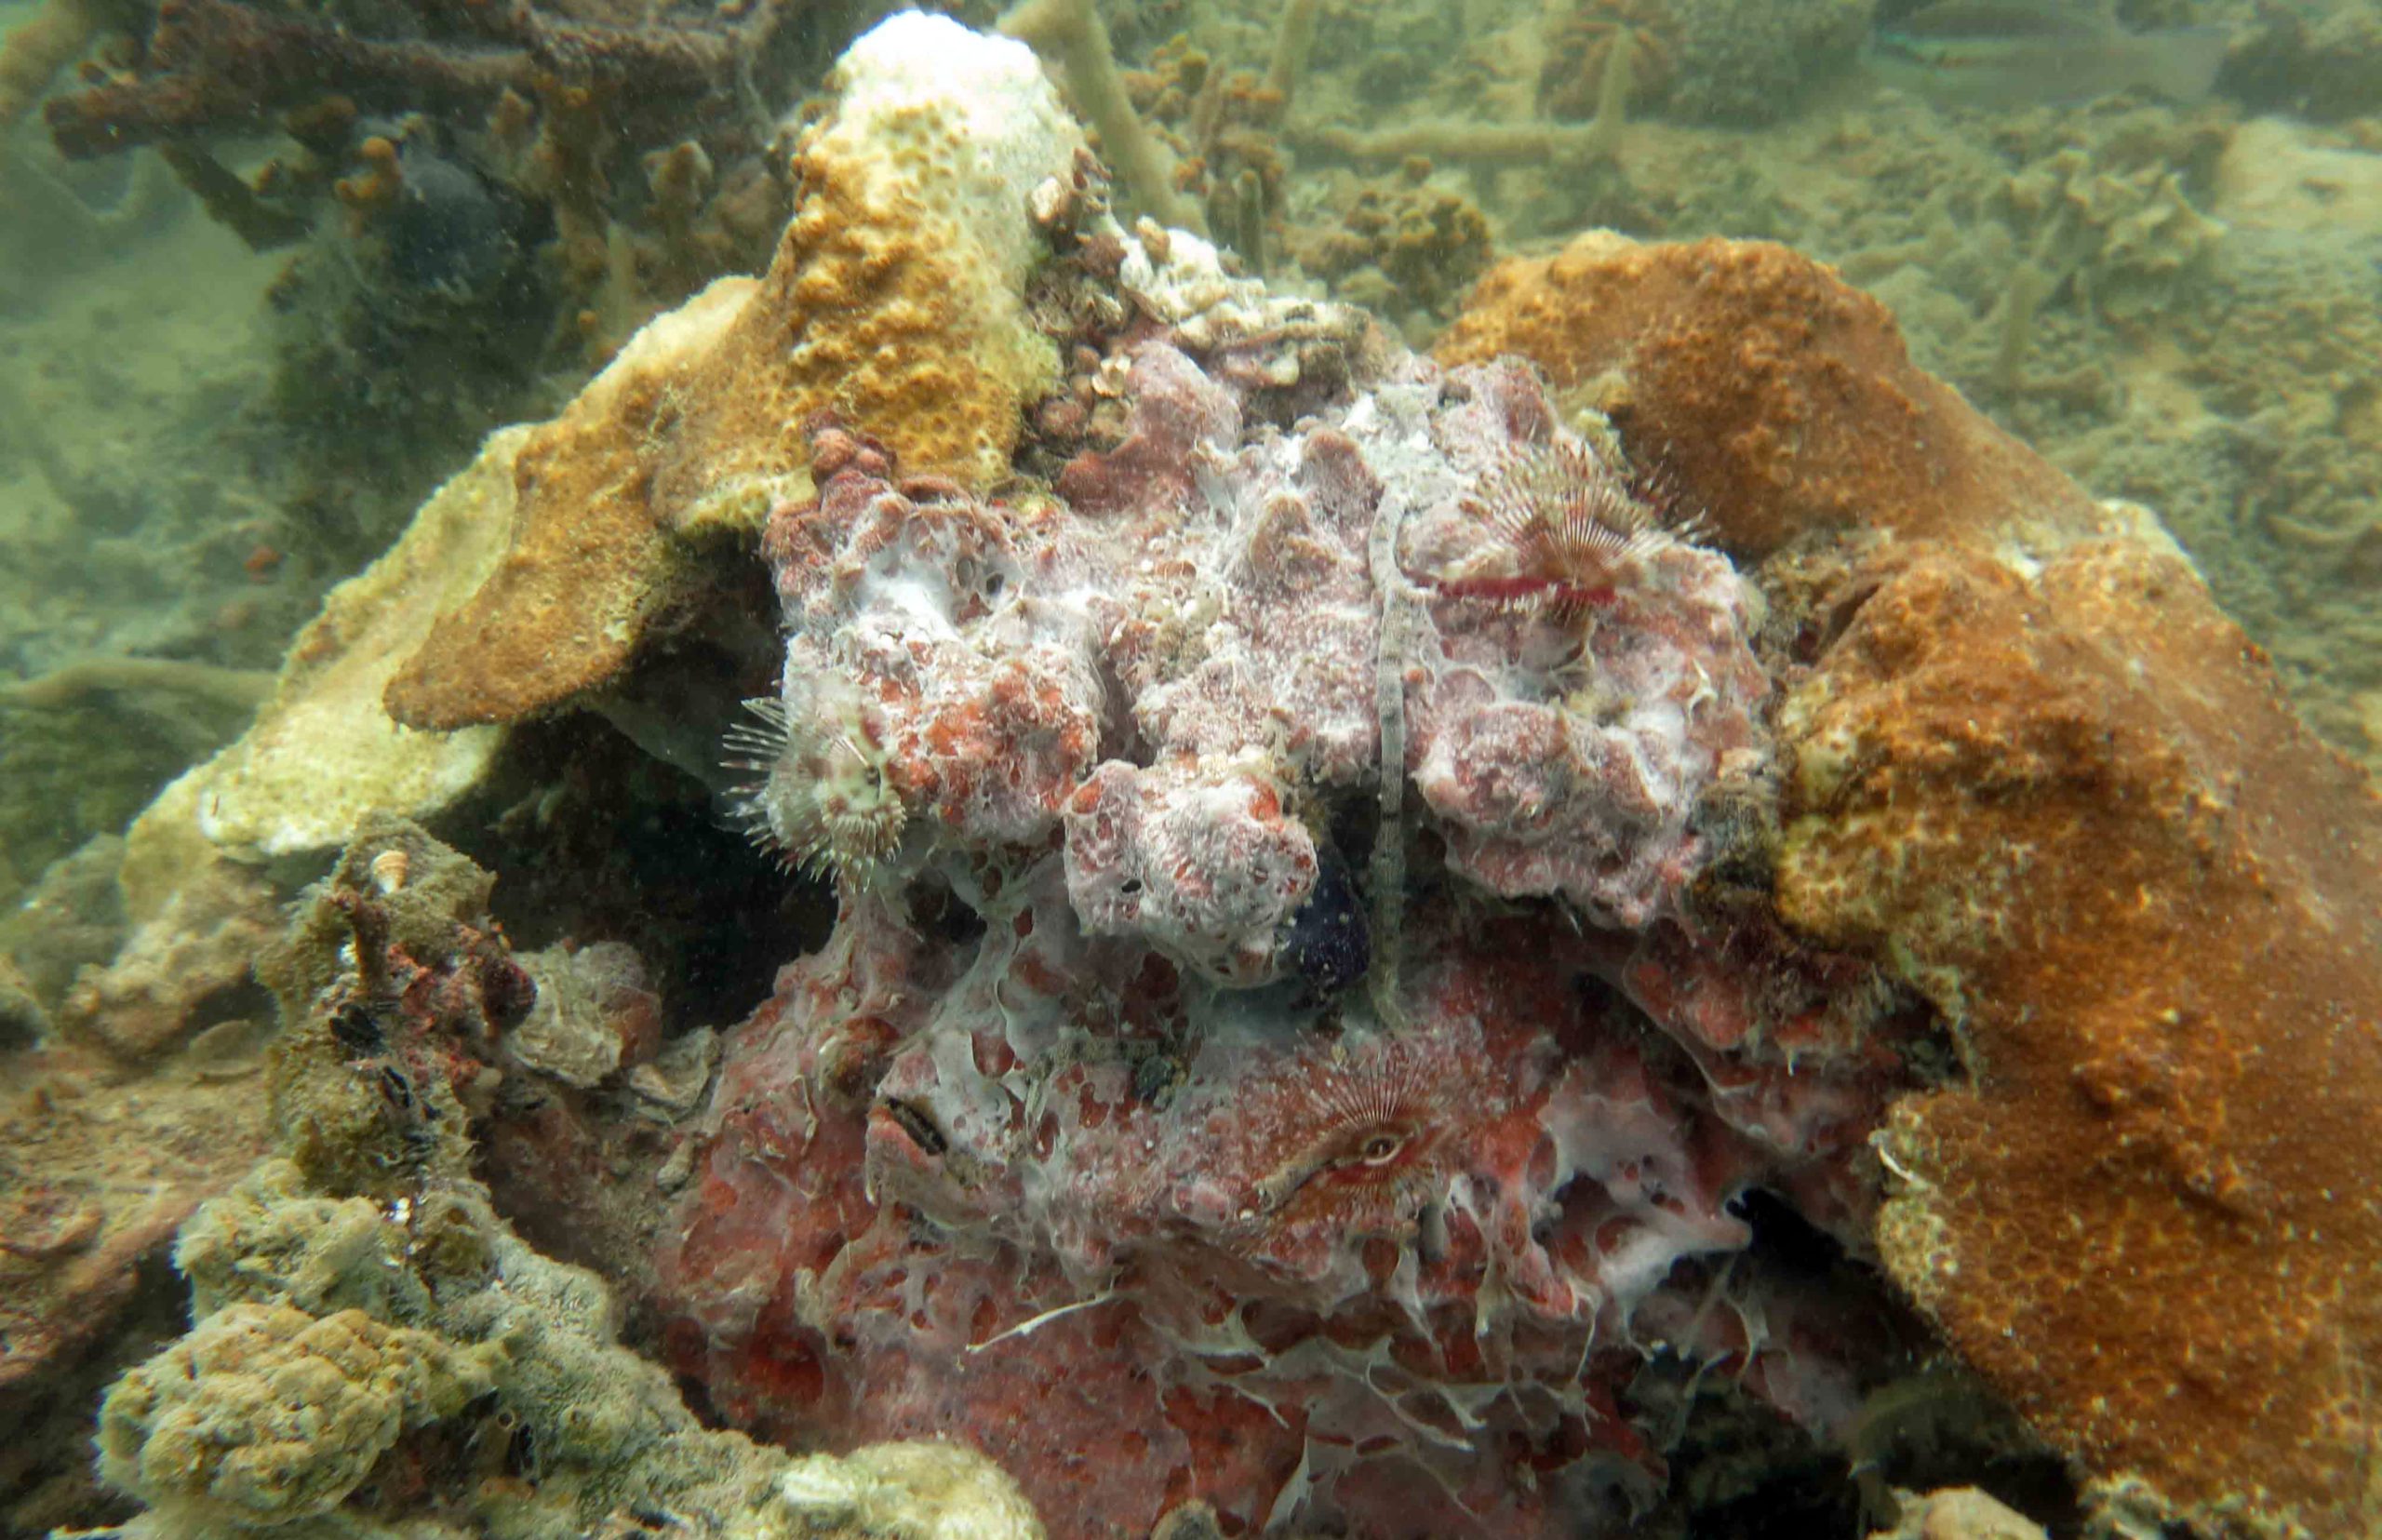 Microbial mats indicate severely low-oxygen conditions at shallow depths on a Panamanian coral reef. (Photo courtesy of Maggie Johnson)